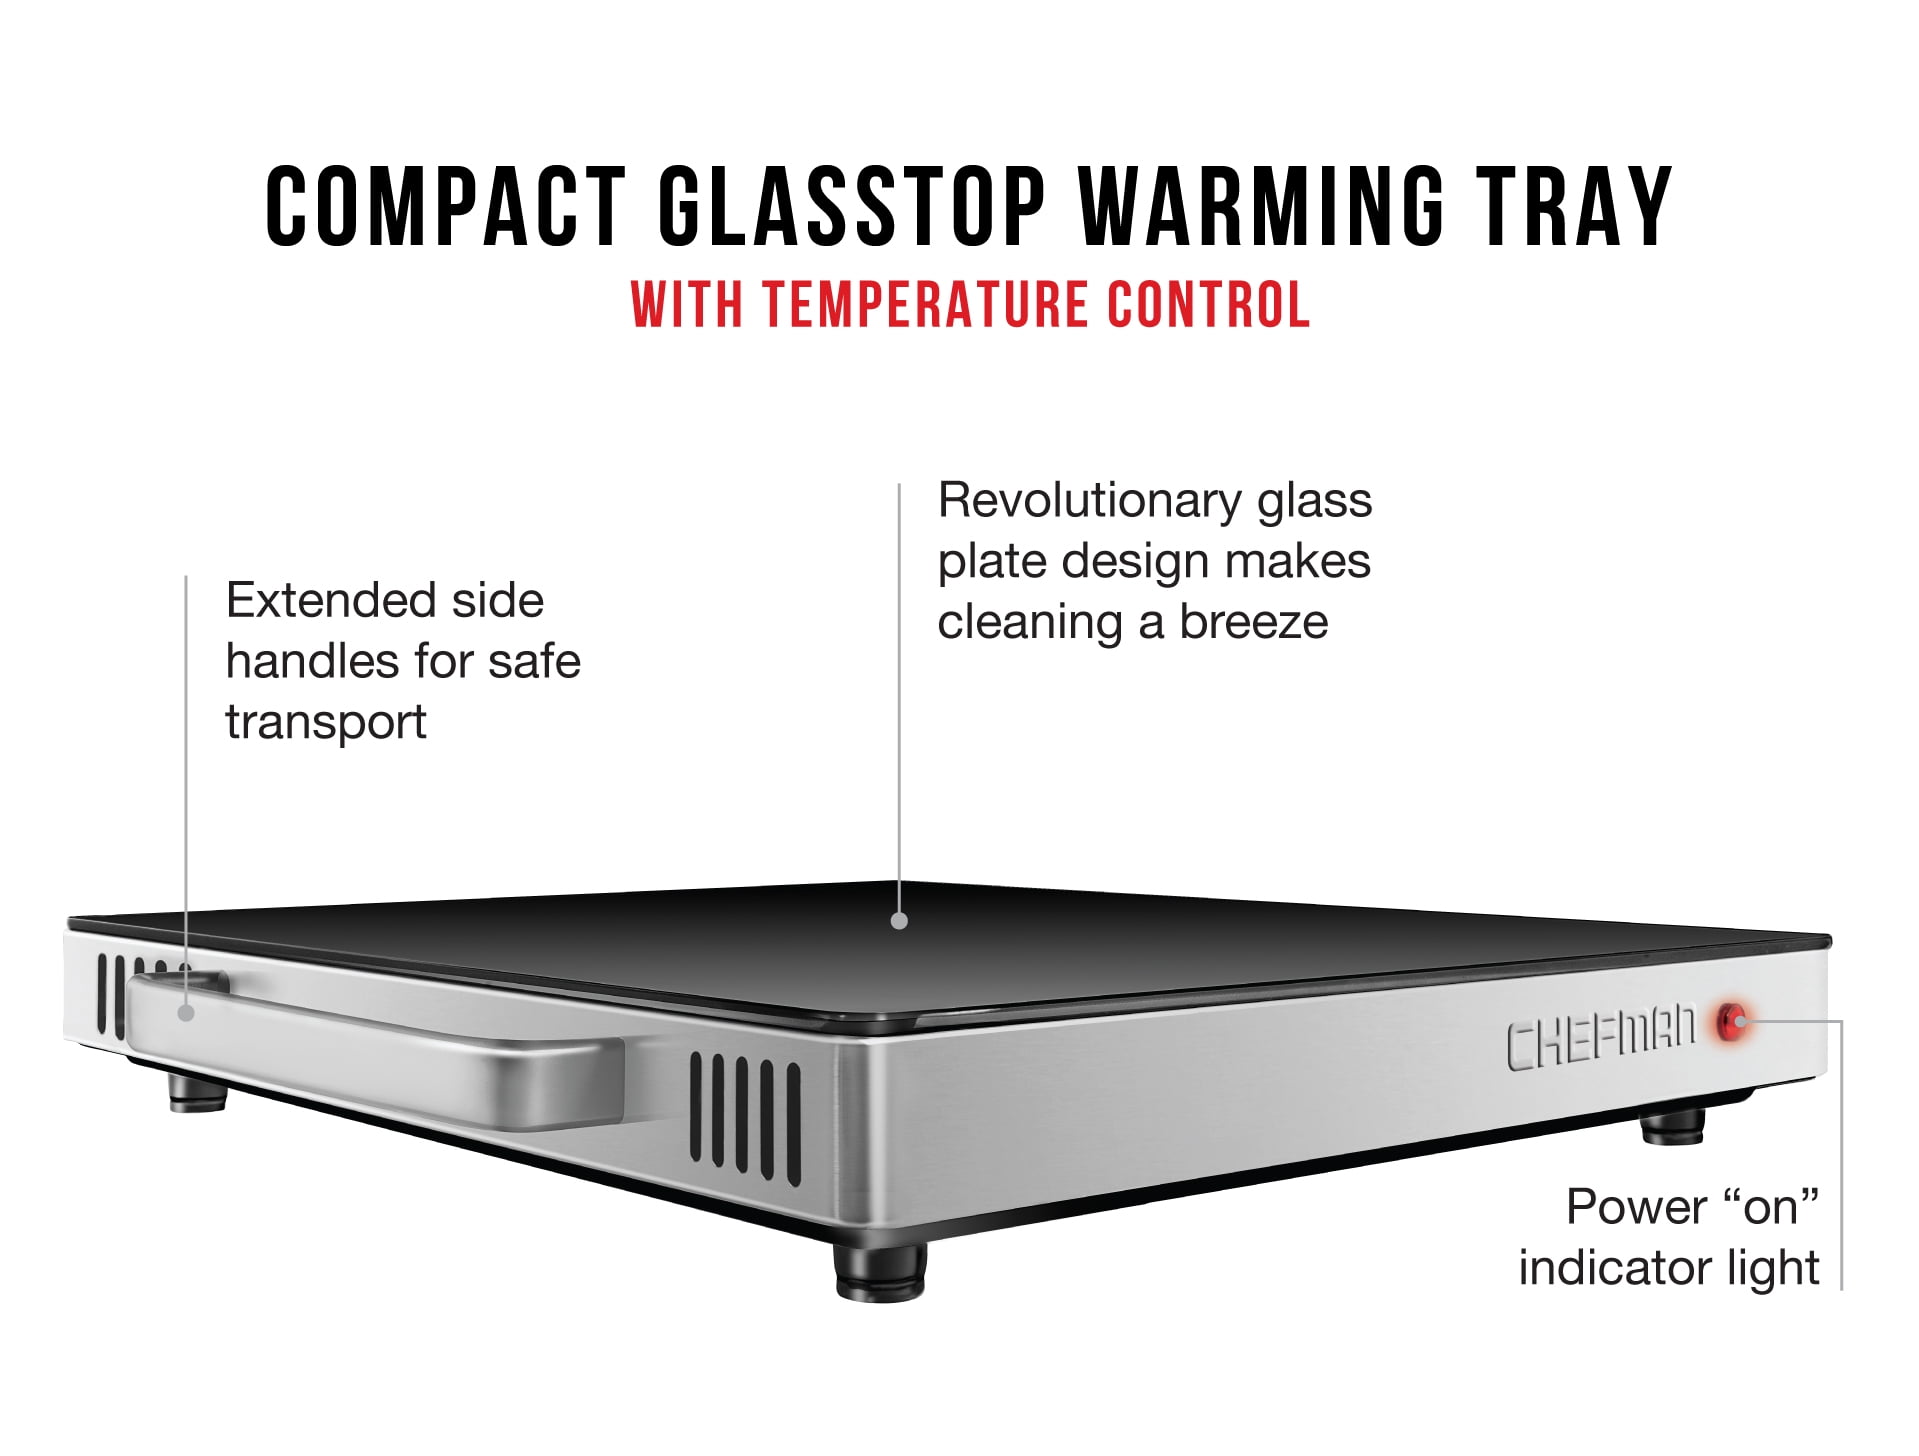 ChefmanundefinedStainless Steel & Glass Electric Warming Tray